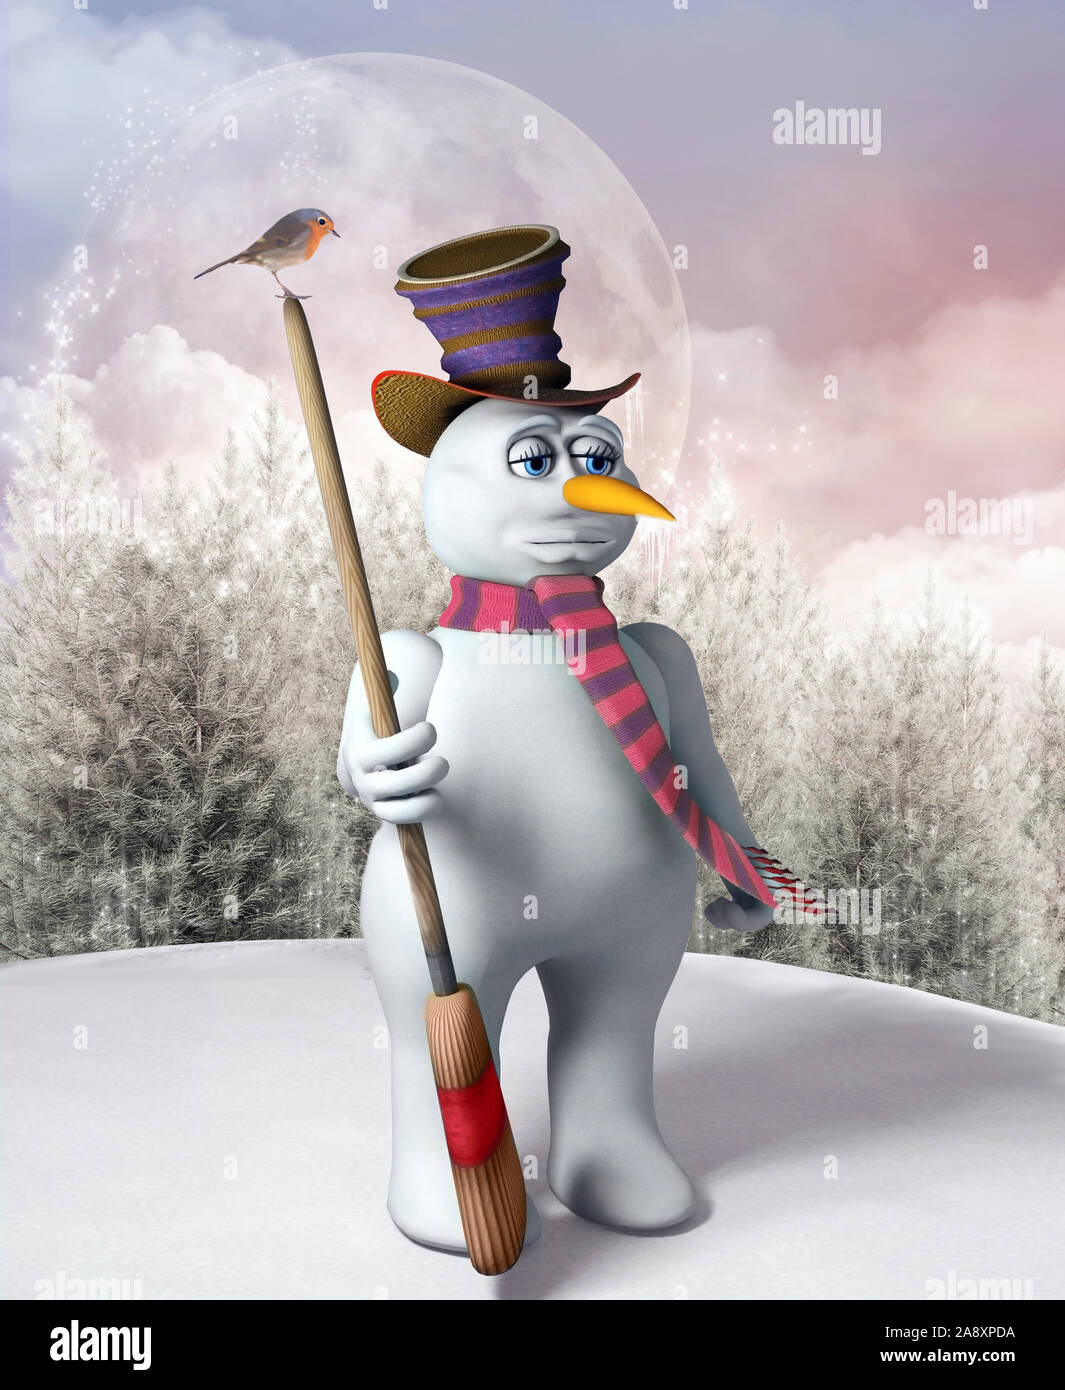 Funny snowman with a broom Stock Photo